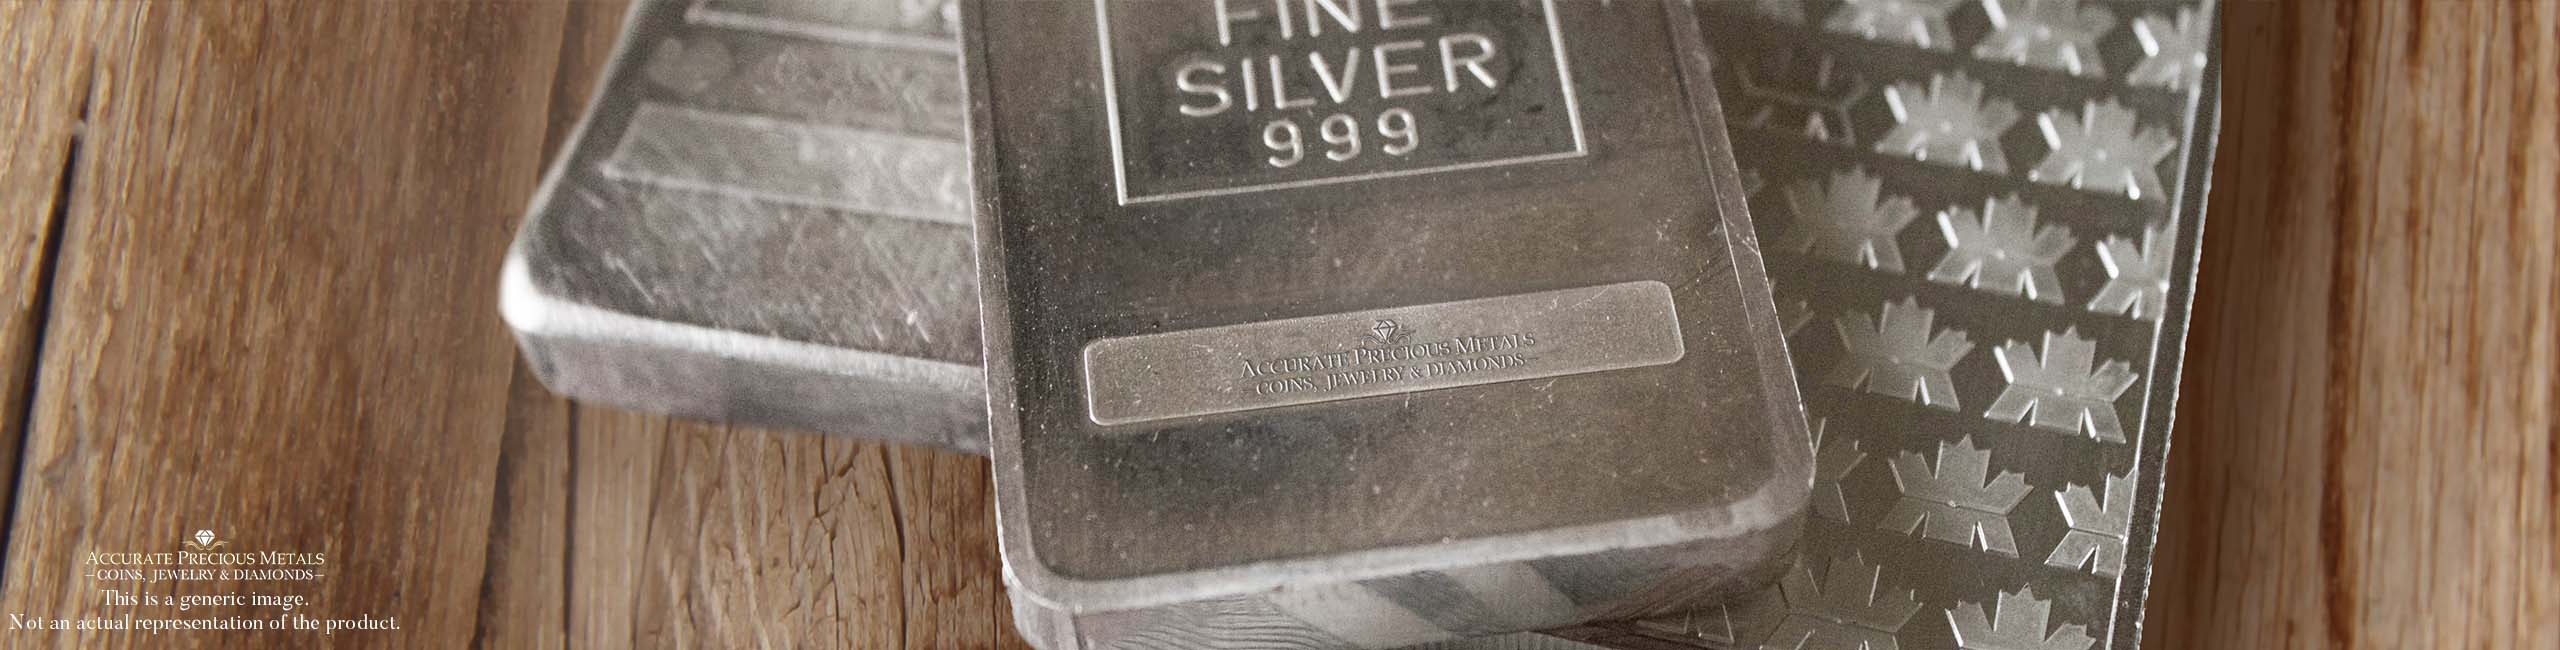 High-quality silver bar showcasing the purity of .999 fine silver - a secure asset for investors.